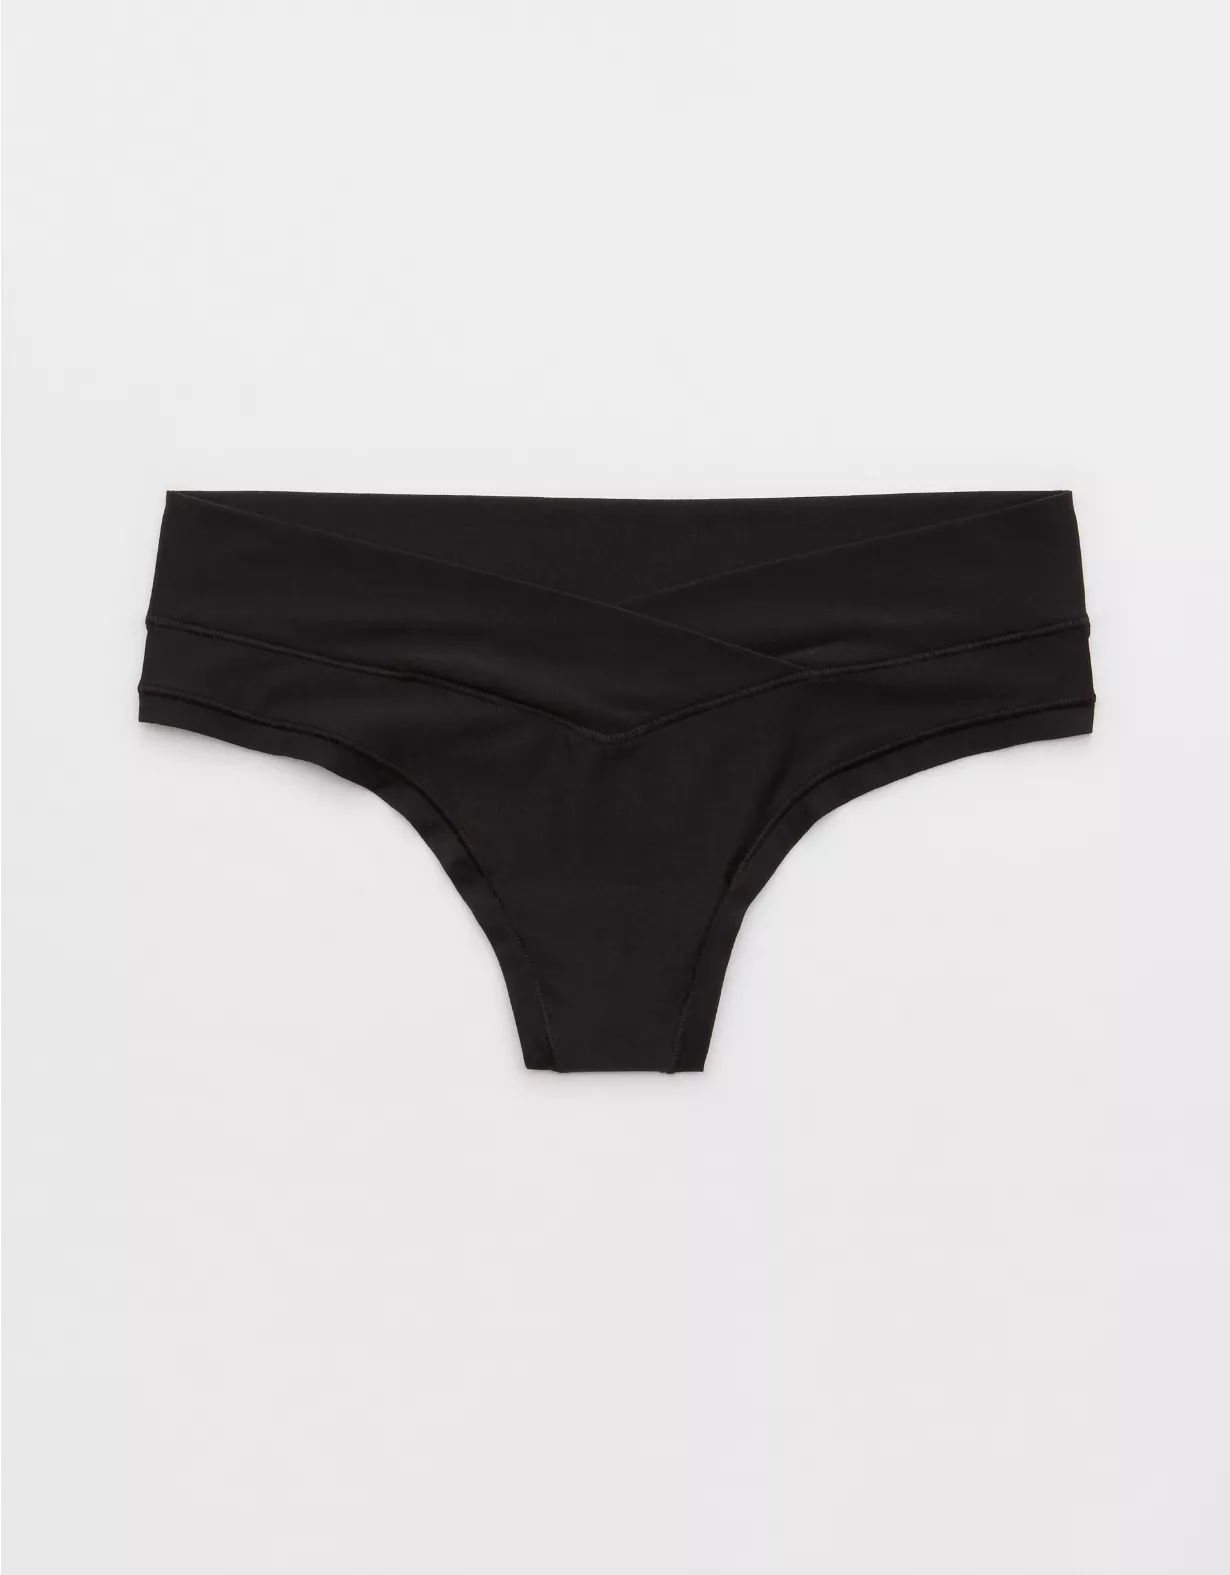 SMOOTHEZ Everyday Crossover Thong Underwear | Aerie